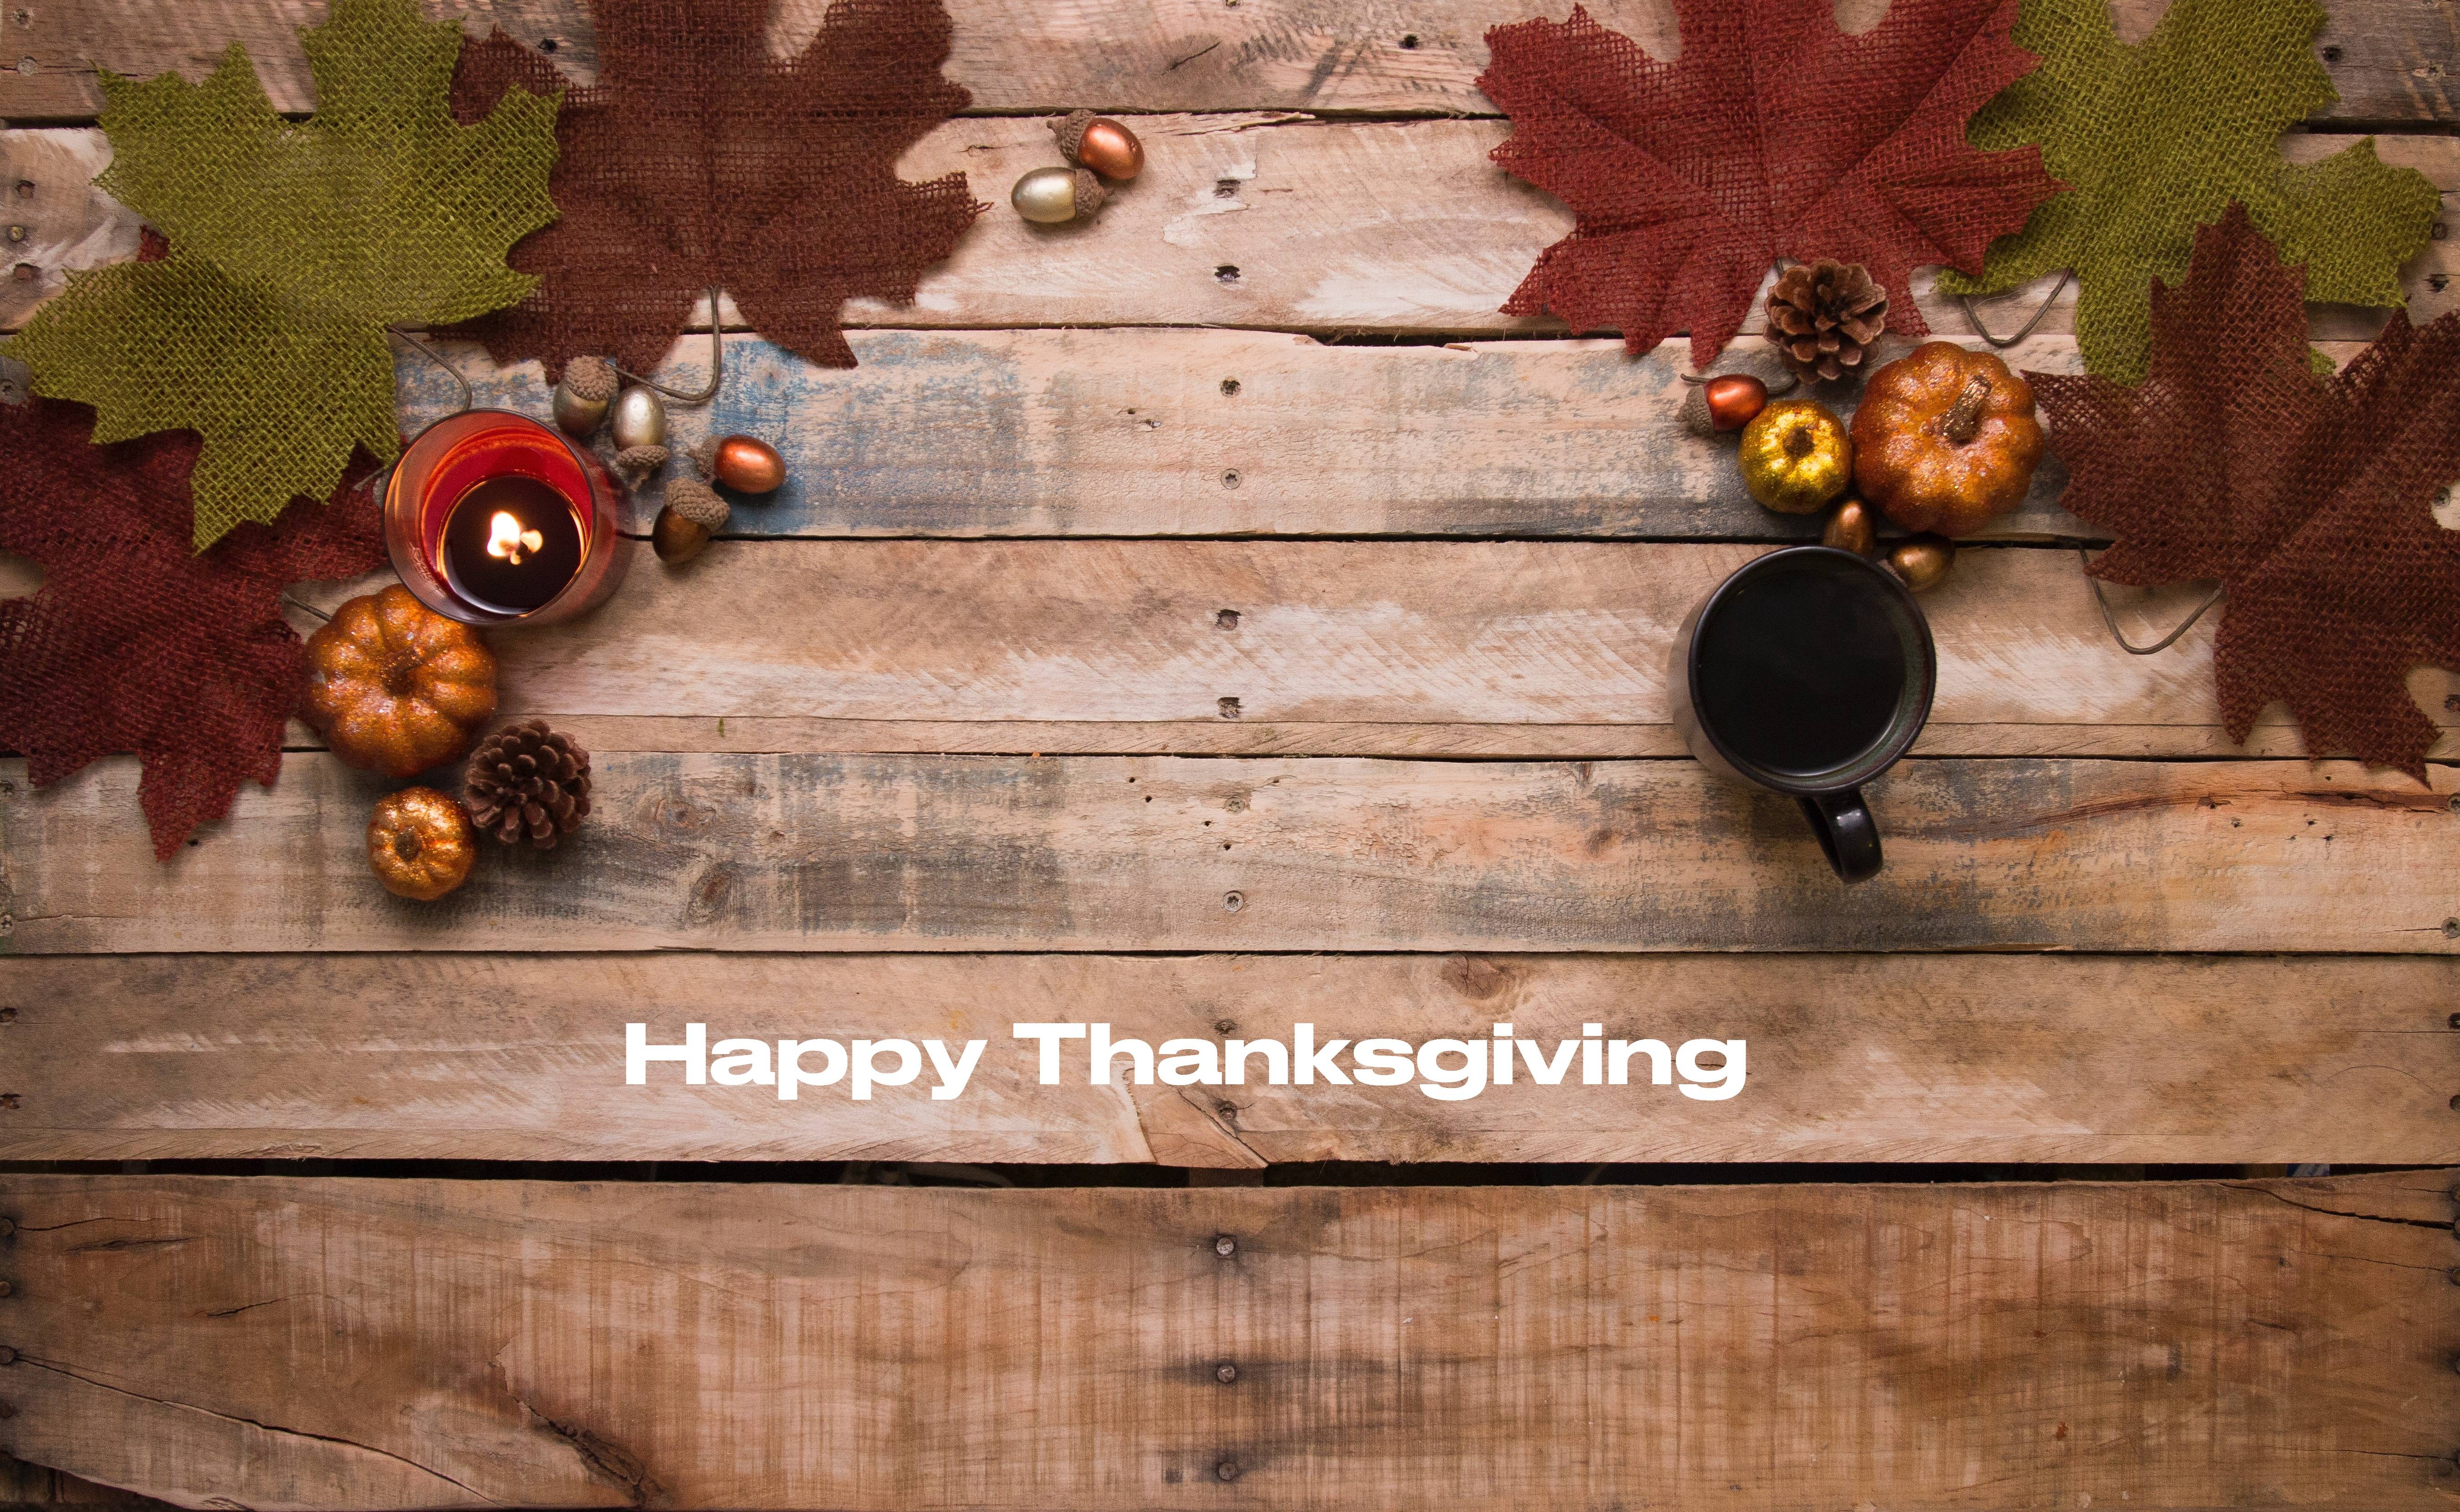 East and West offices closed for the Thanksgiving holidays